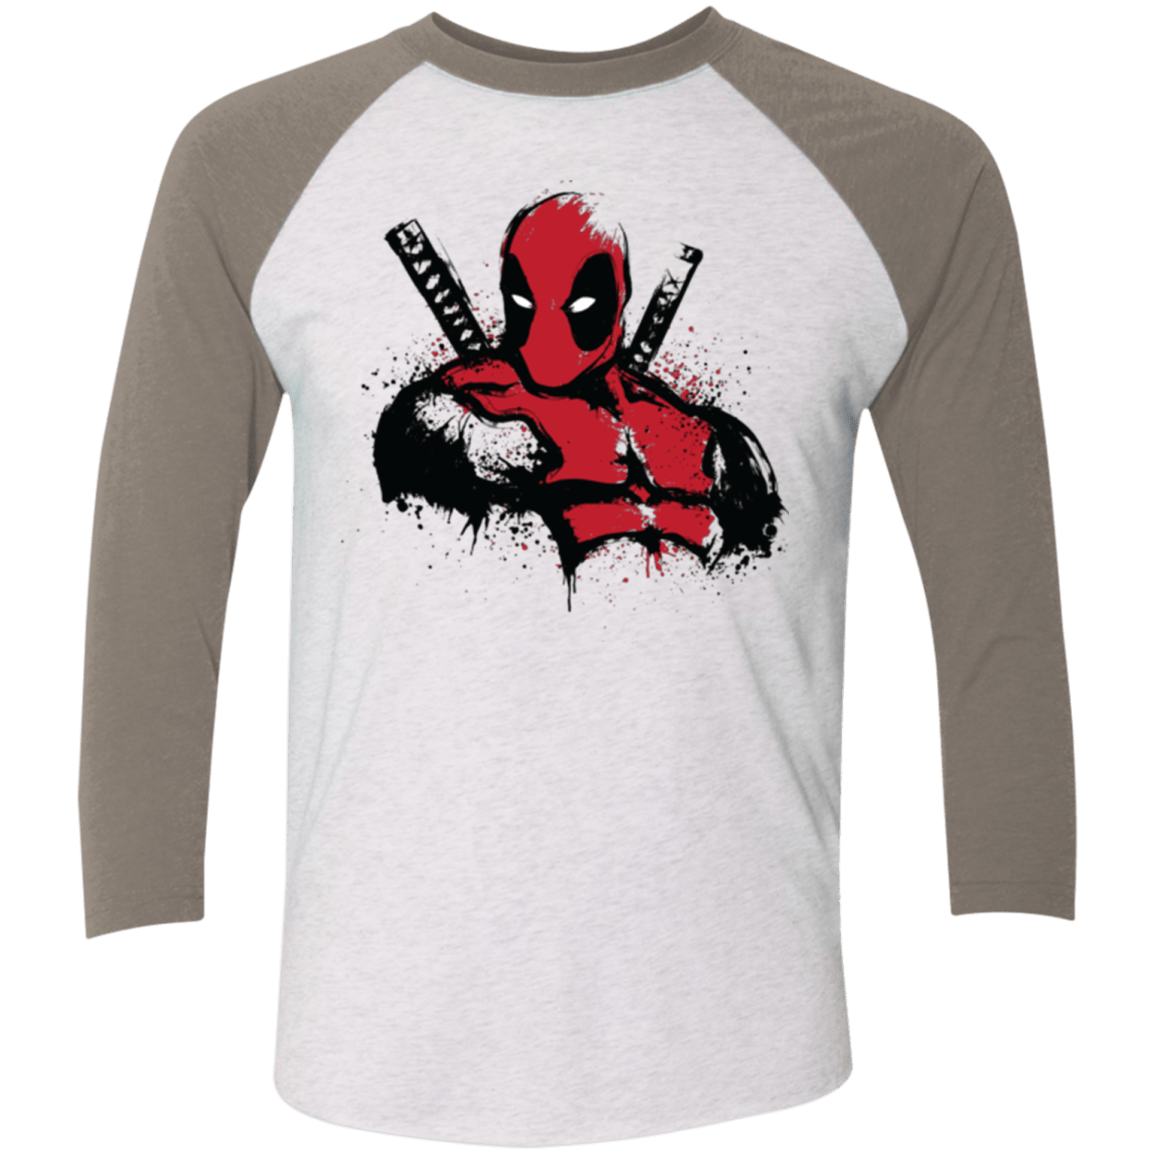 T-Shirts Heather White/Vintage Grey / X-Small The Merc in Red Men's Triblend 3/4 Sleeve